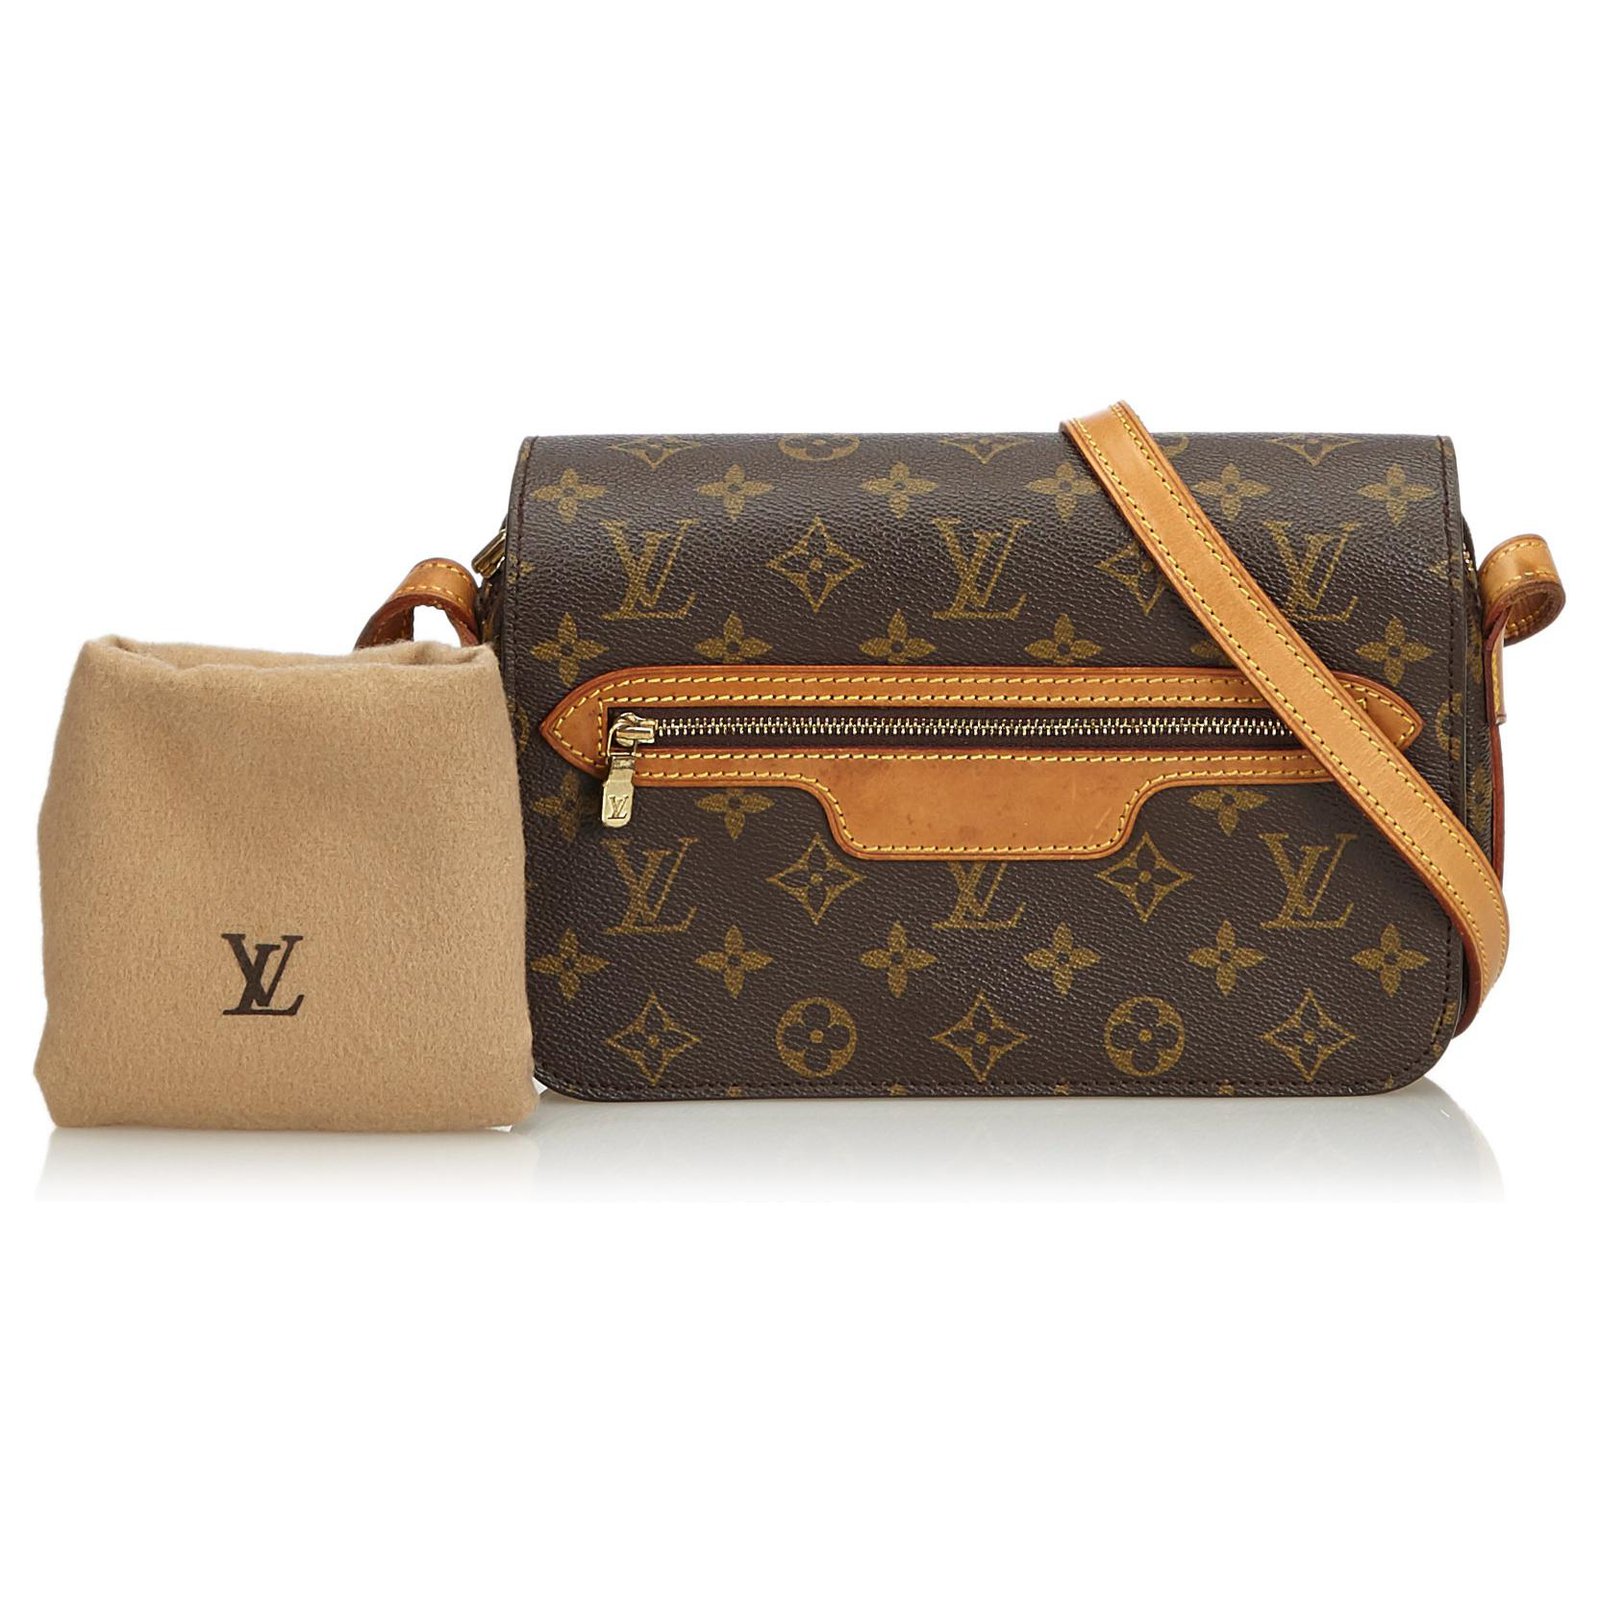 Lv Bags In New Jersey  Natural Resource Department